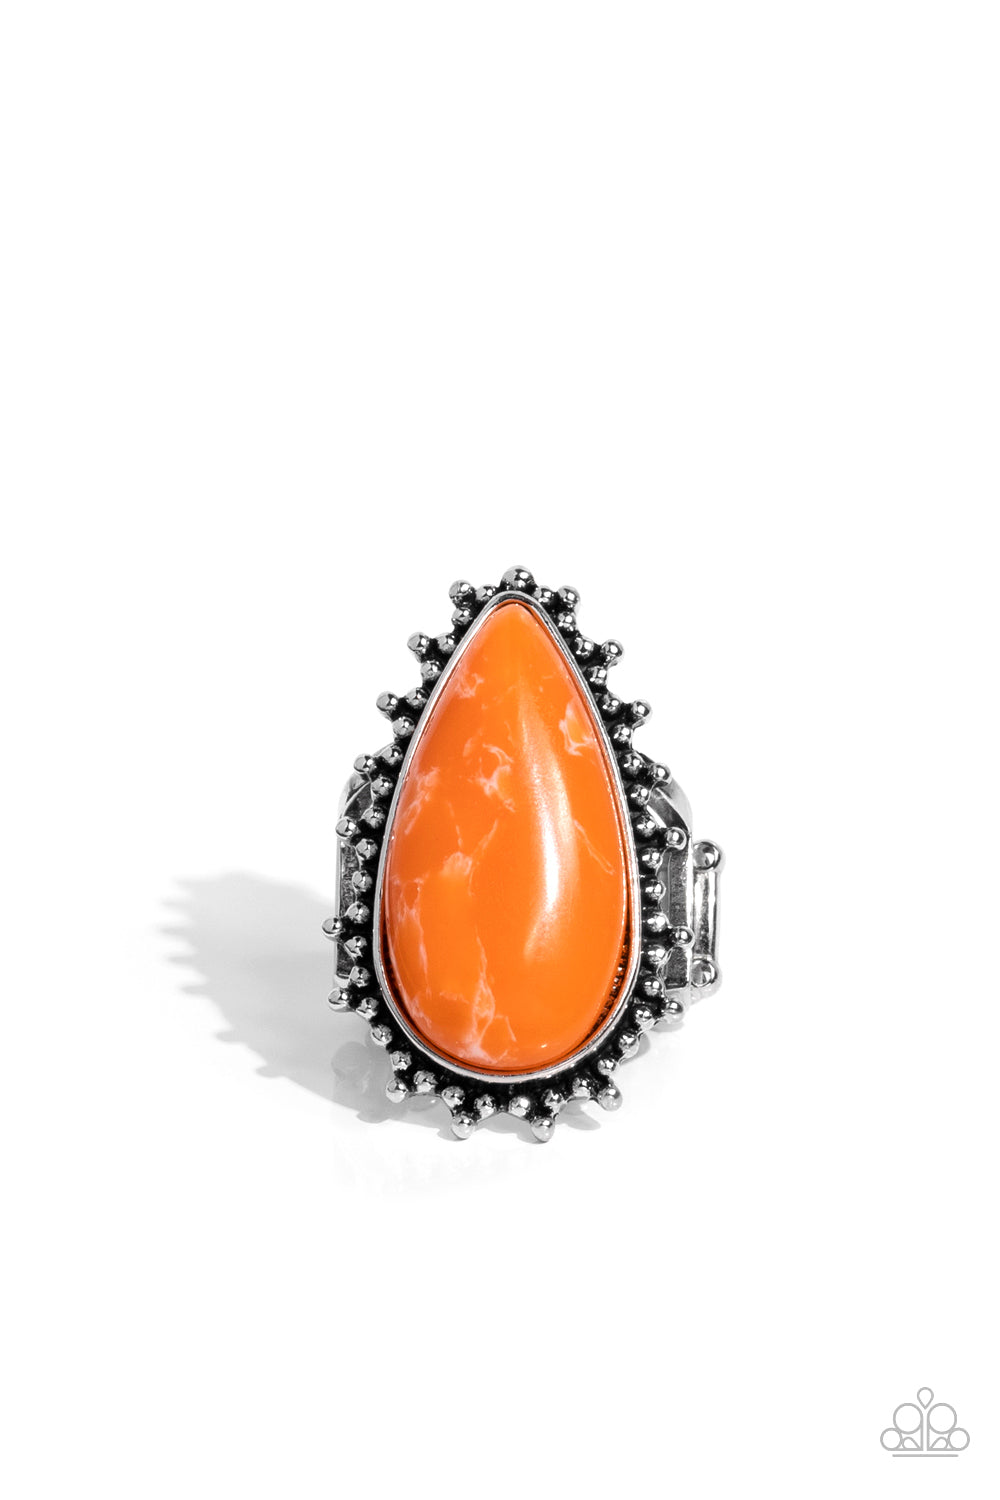 Paparazzi Accessories Down-To-Earth- Essence - Orange Stone Ring chiseled into a tranquil teardrop, a refreshing orange stone is pressed into the center of a studded silver frame for an earthy ensemble. Features a stretchy band for a flexible fit.  Sold as one individual ring.